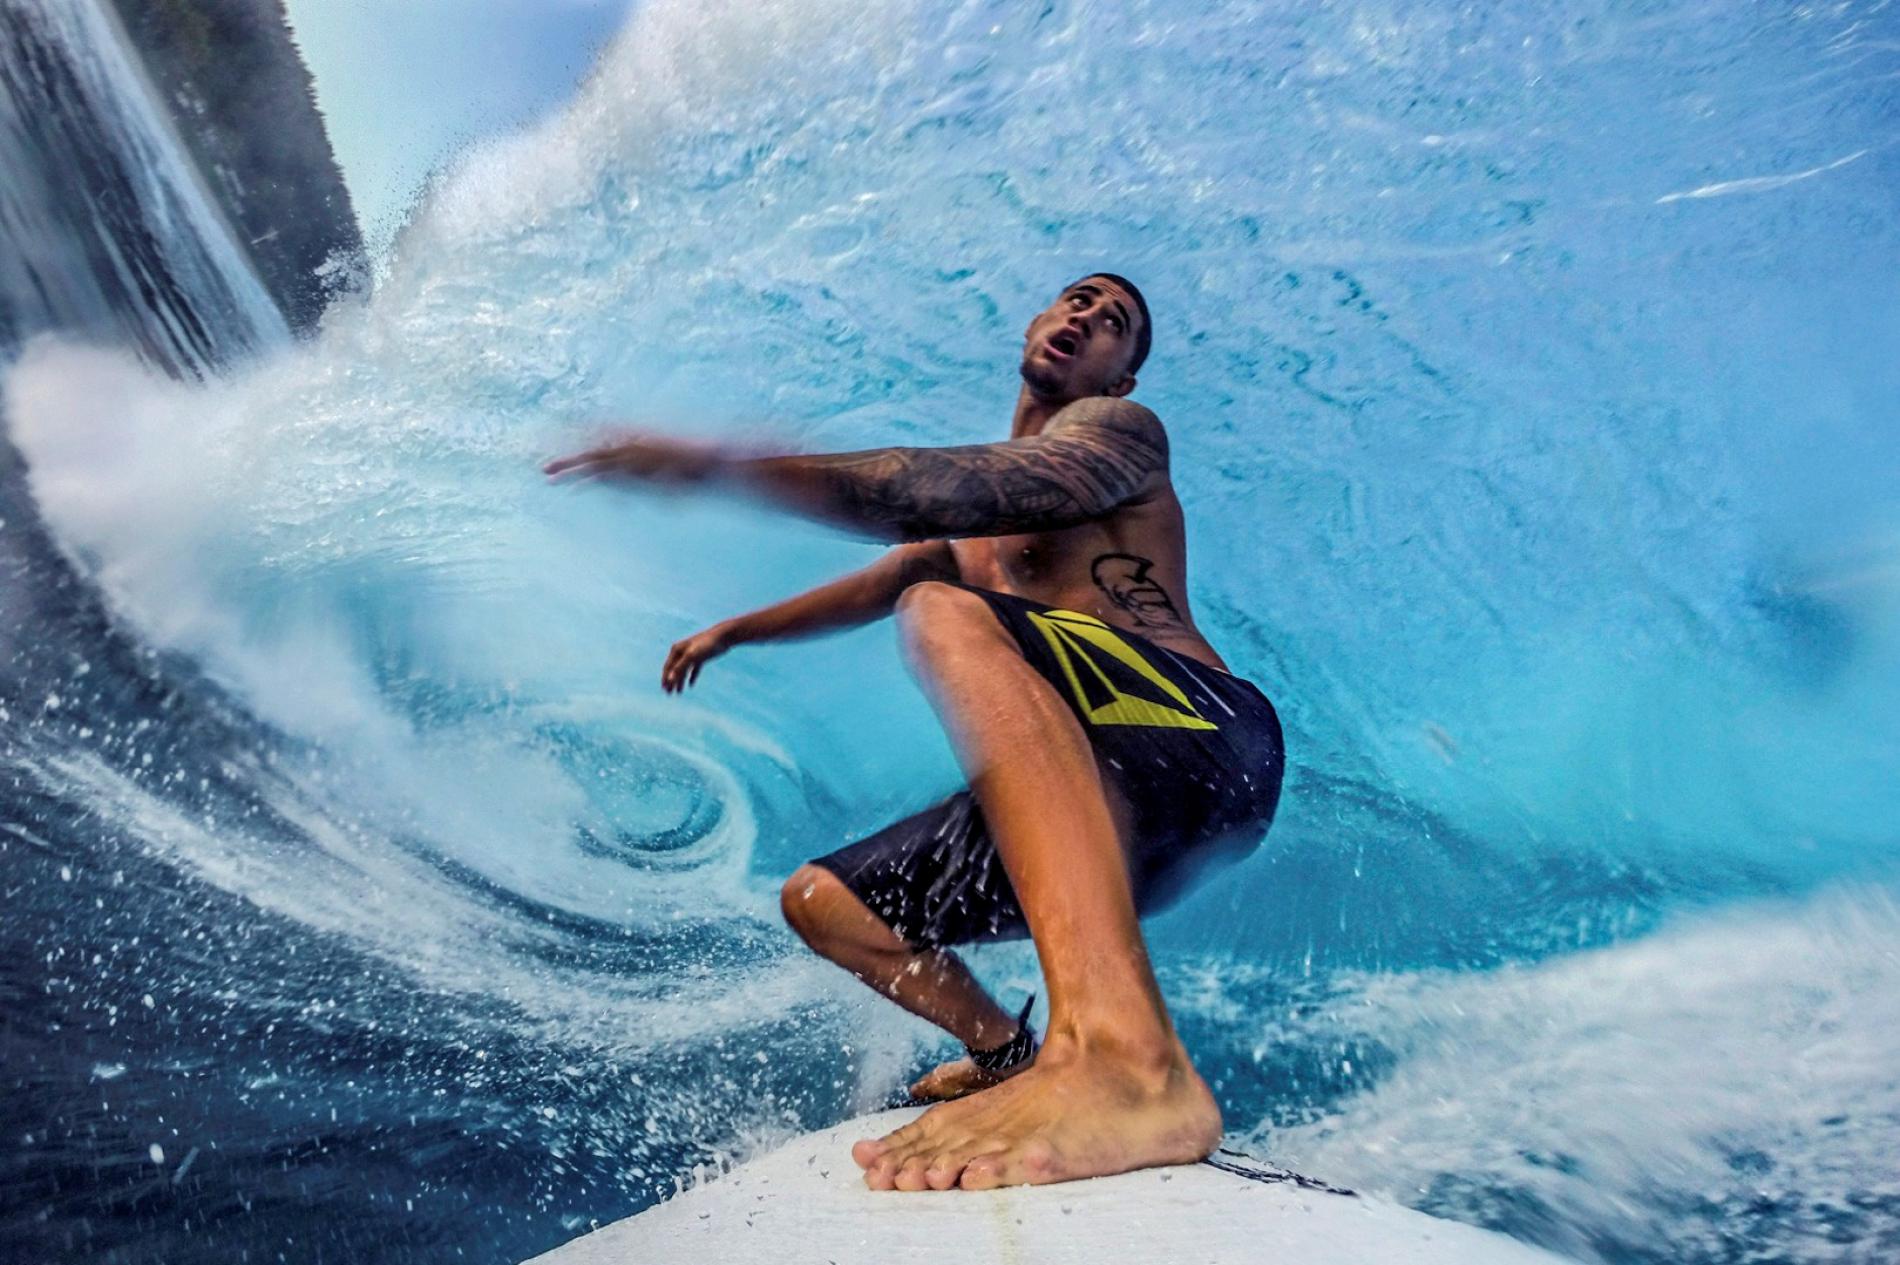 Surf's Up! 12 Pictures Capture the Thrill of Riding Waves